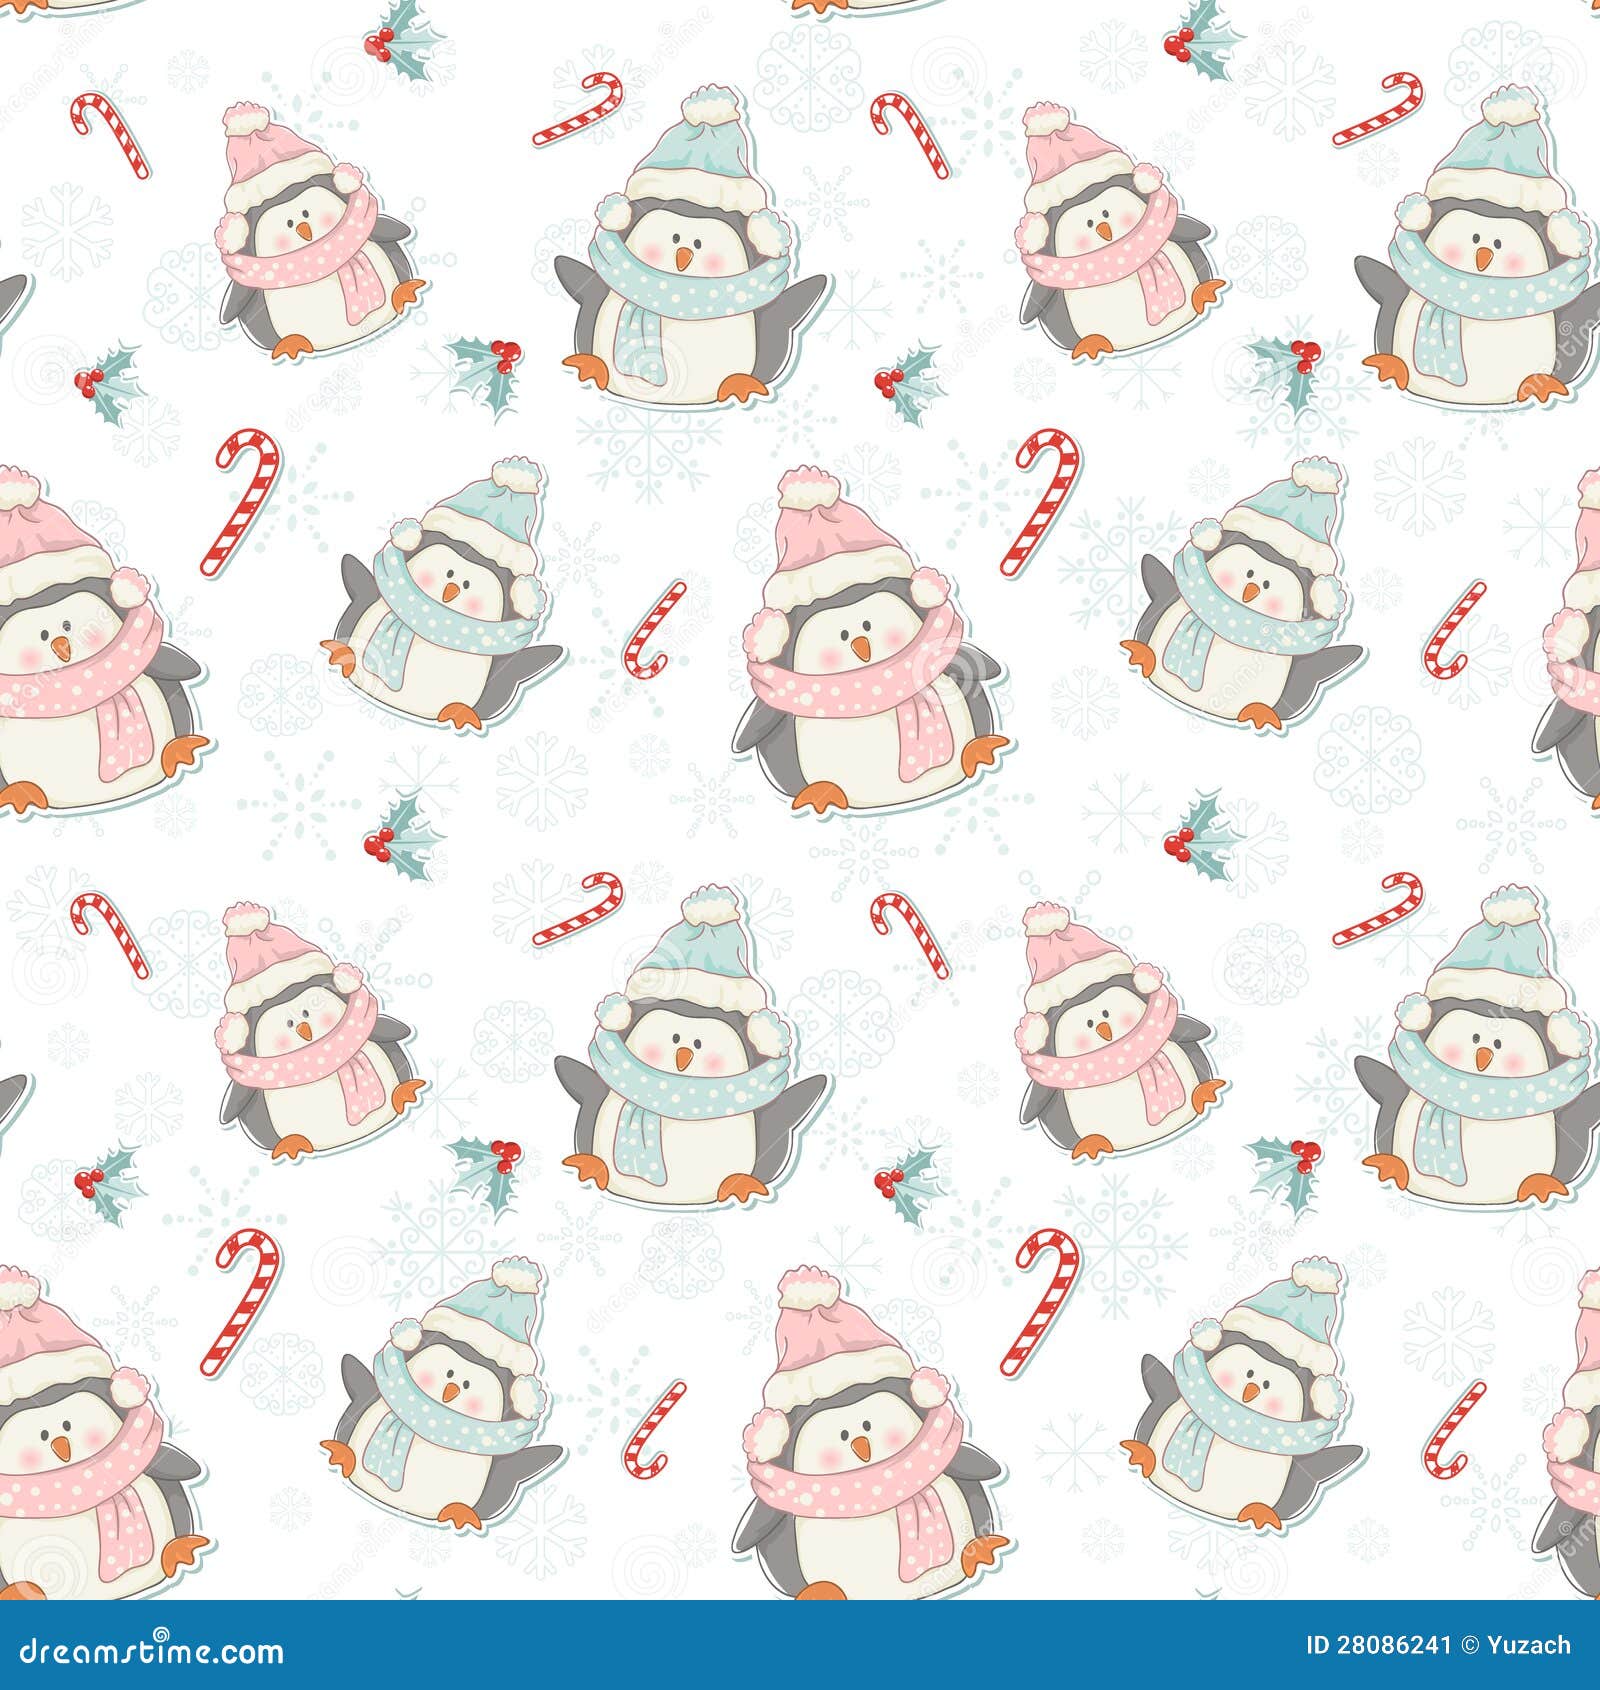 Cute Christmas Penguins Seamless Pattern Stock Vector - Image: 28086241